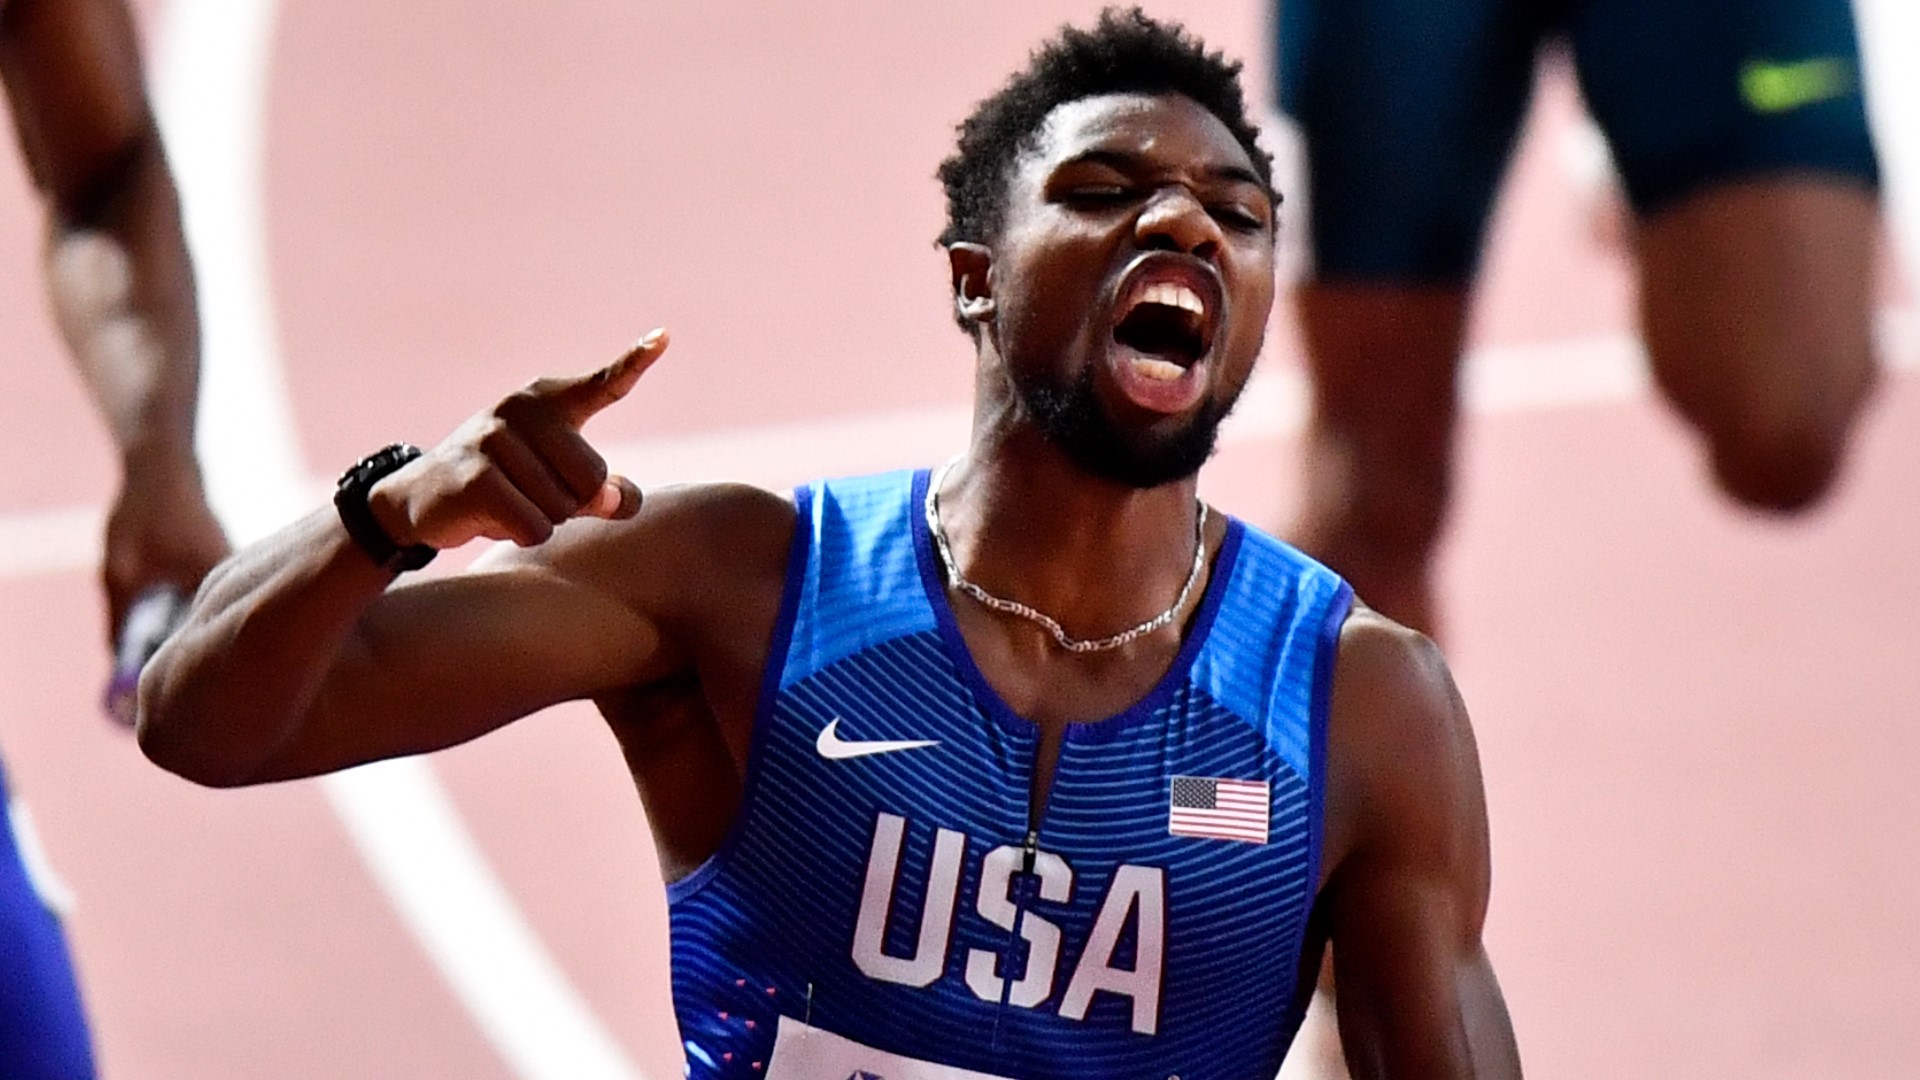 There is a creativity to Noah Lyles that can't be contained simply by his expressions after victories on the track